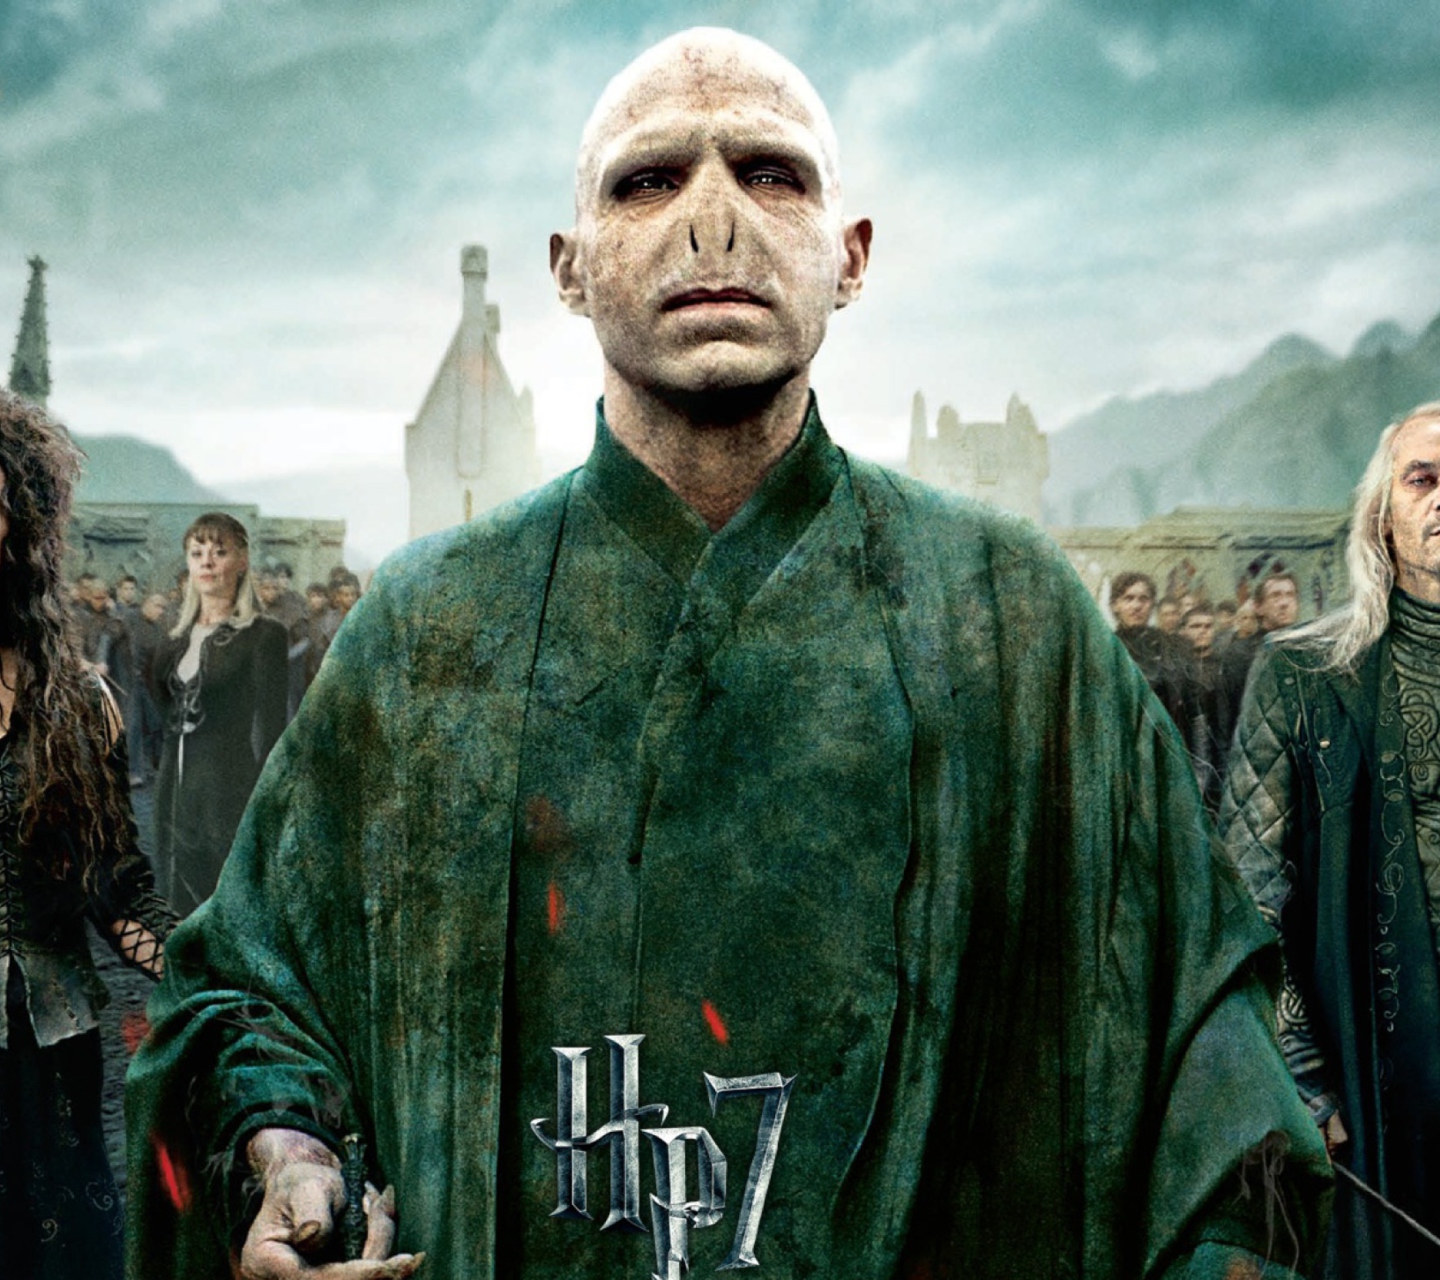 Harry Potter And The Deathly Hallows Part 2 wallpaper 1440x1280